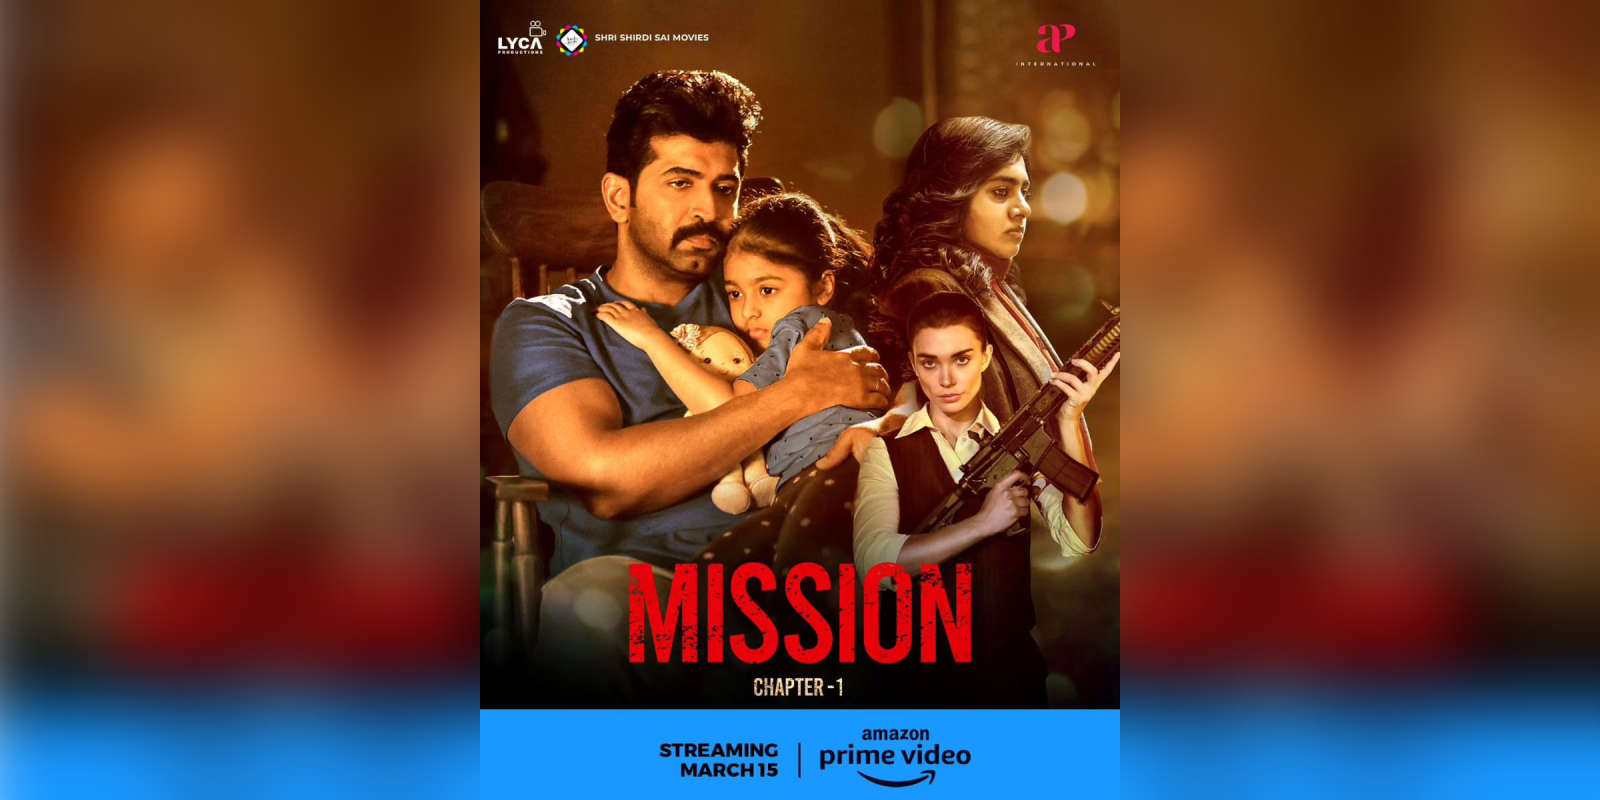 Arun Vijay's 'Mission: Chapter 1' streaming on Amazon Prime Video